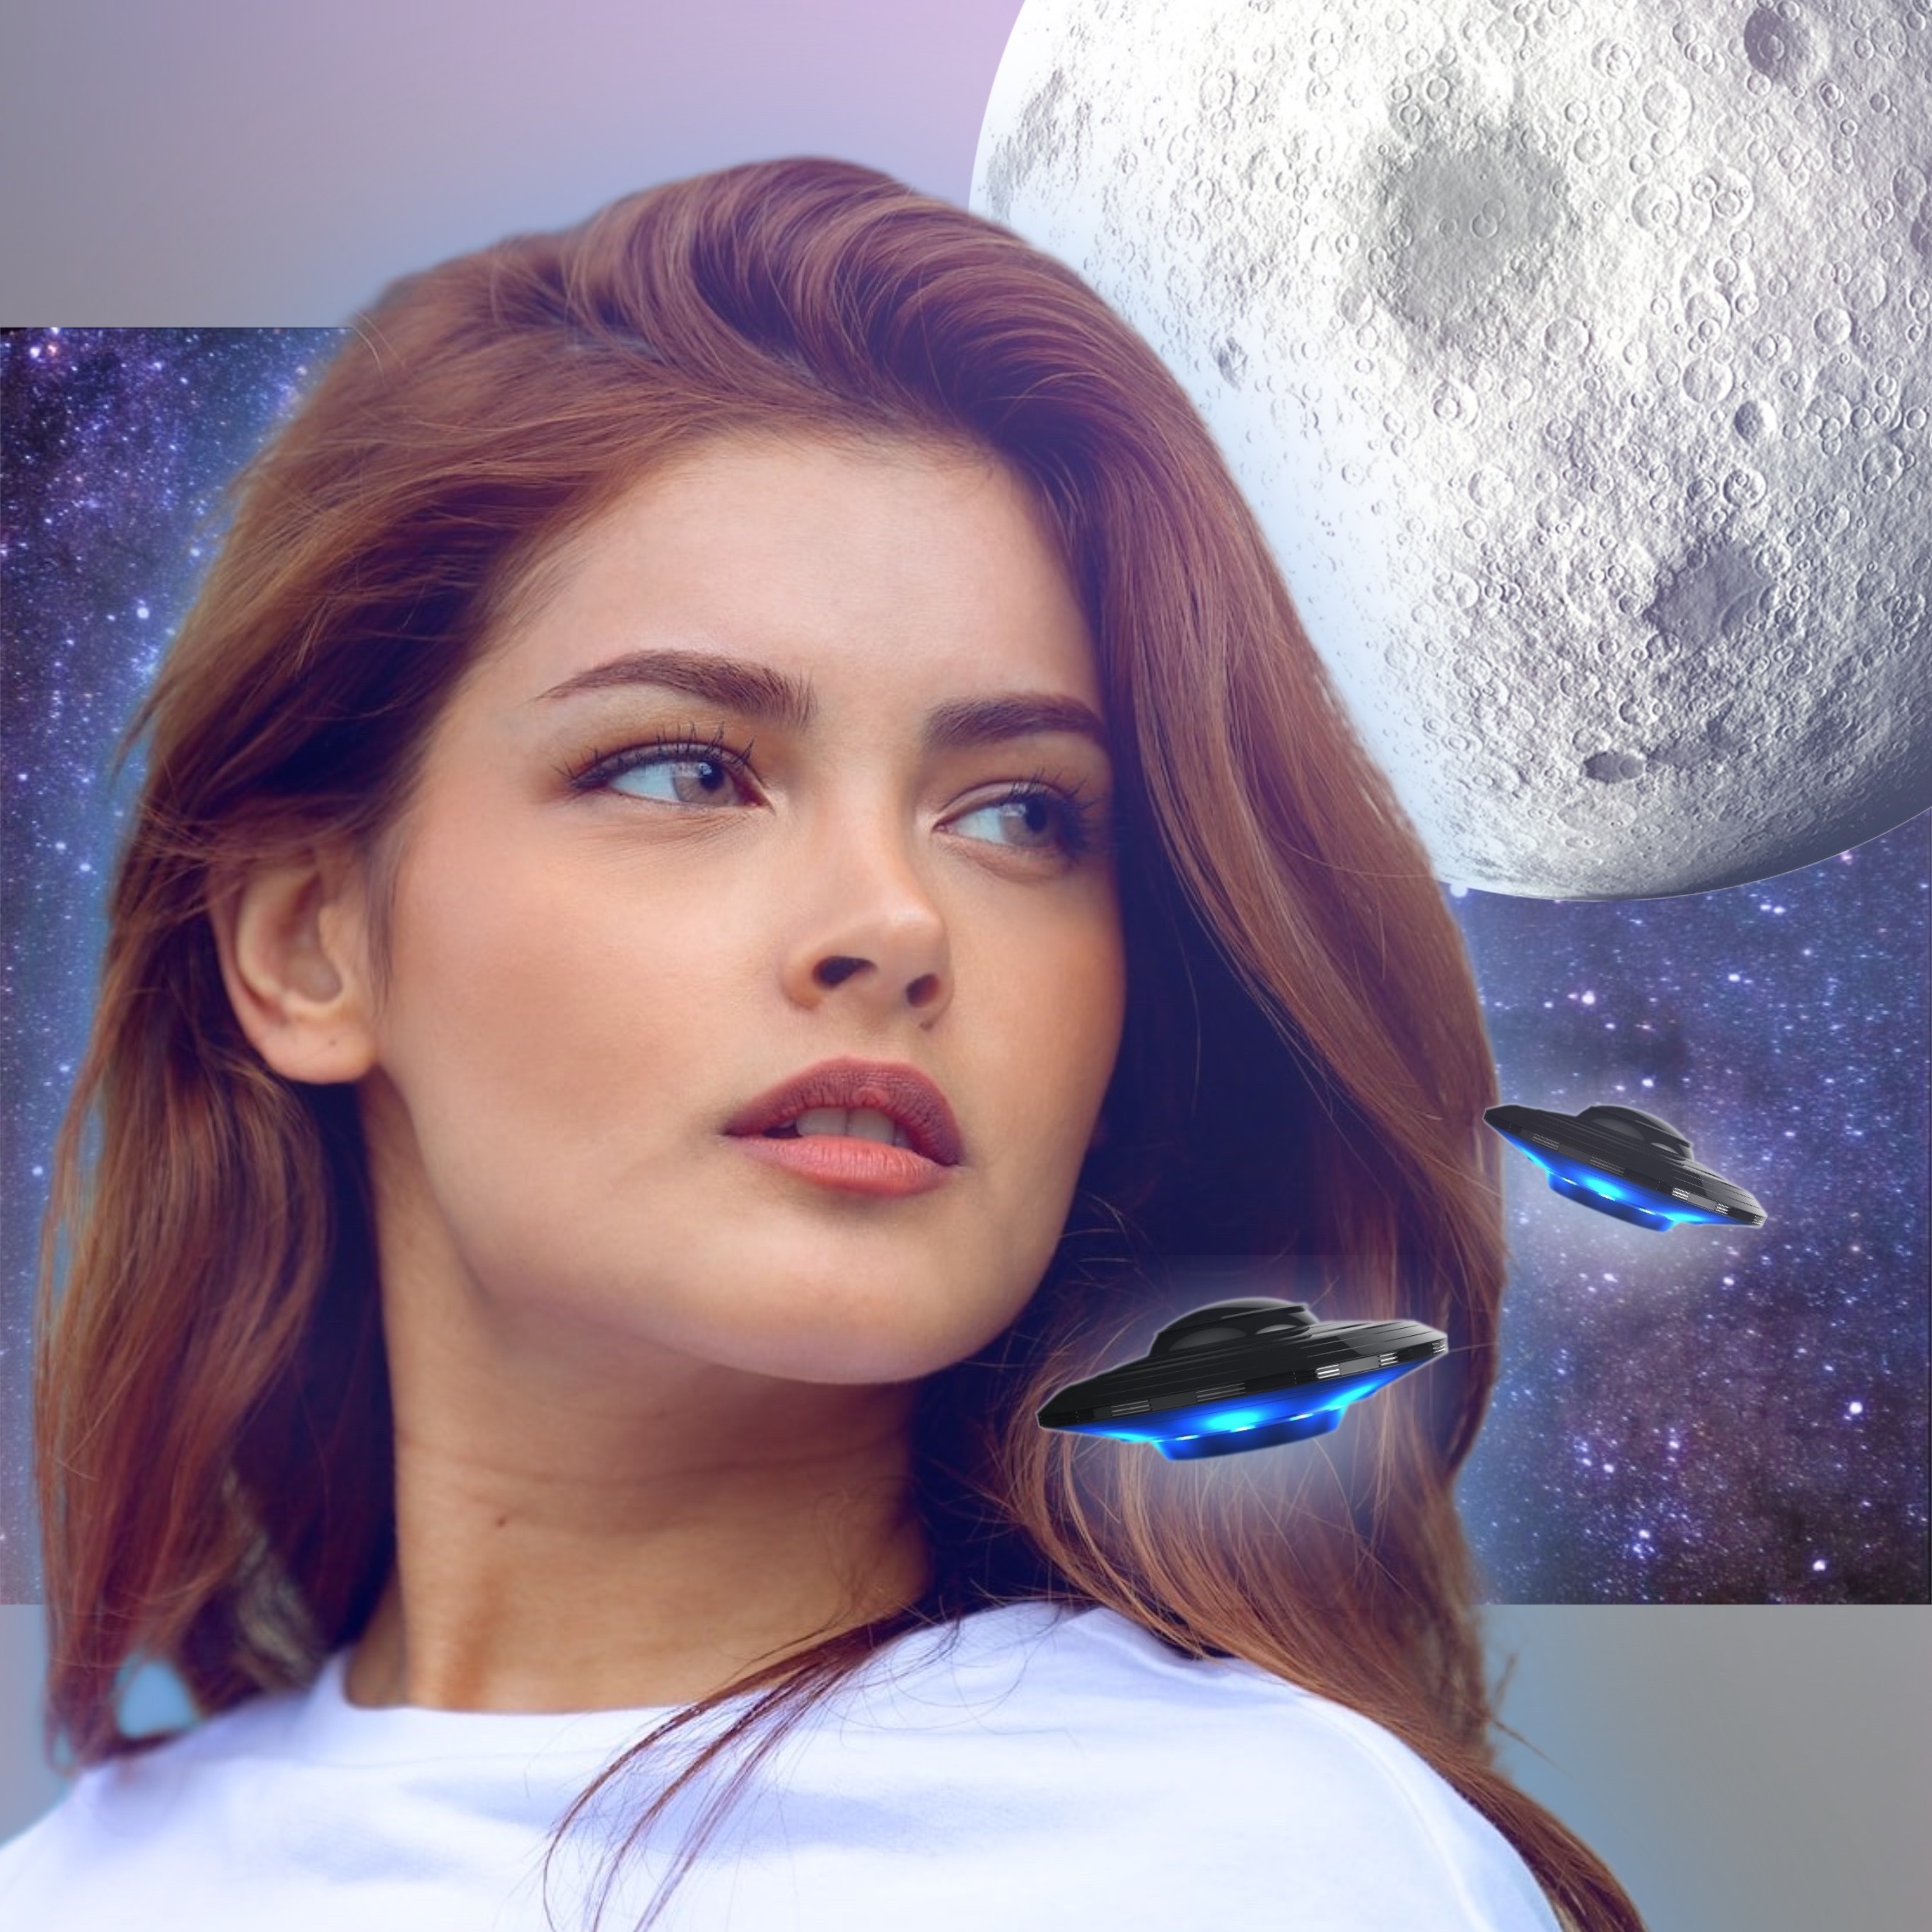 Profile Pic With Woman In The Space, Stars, Planets And Spaceship